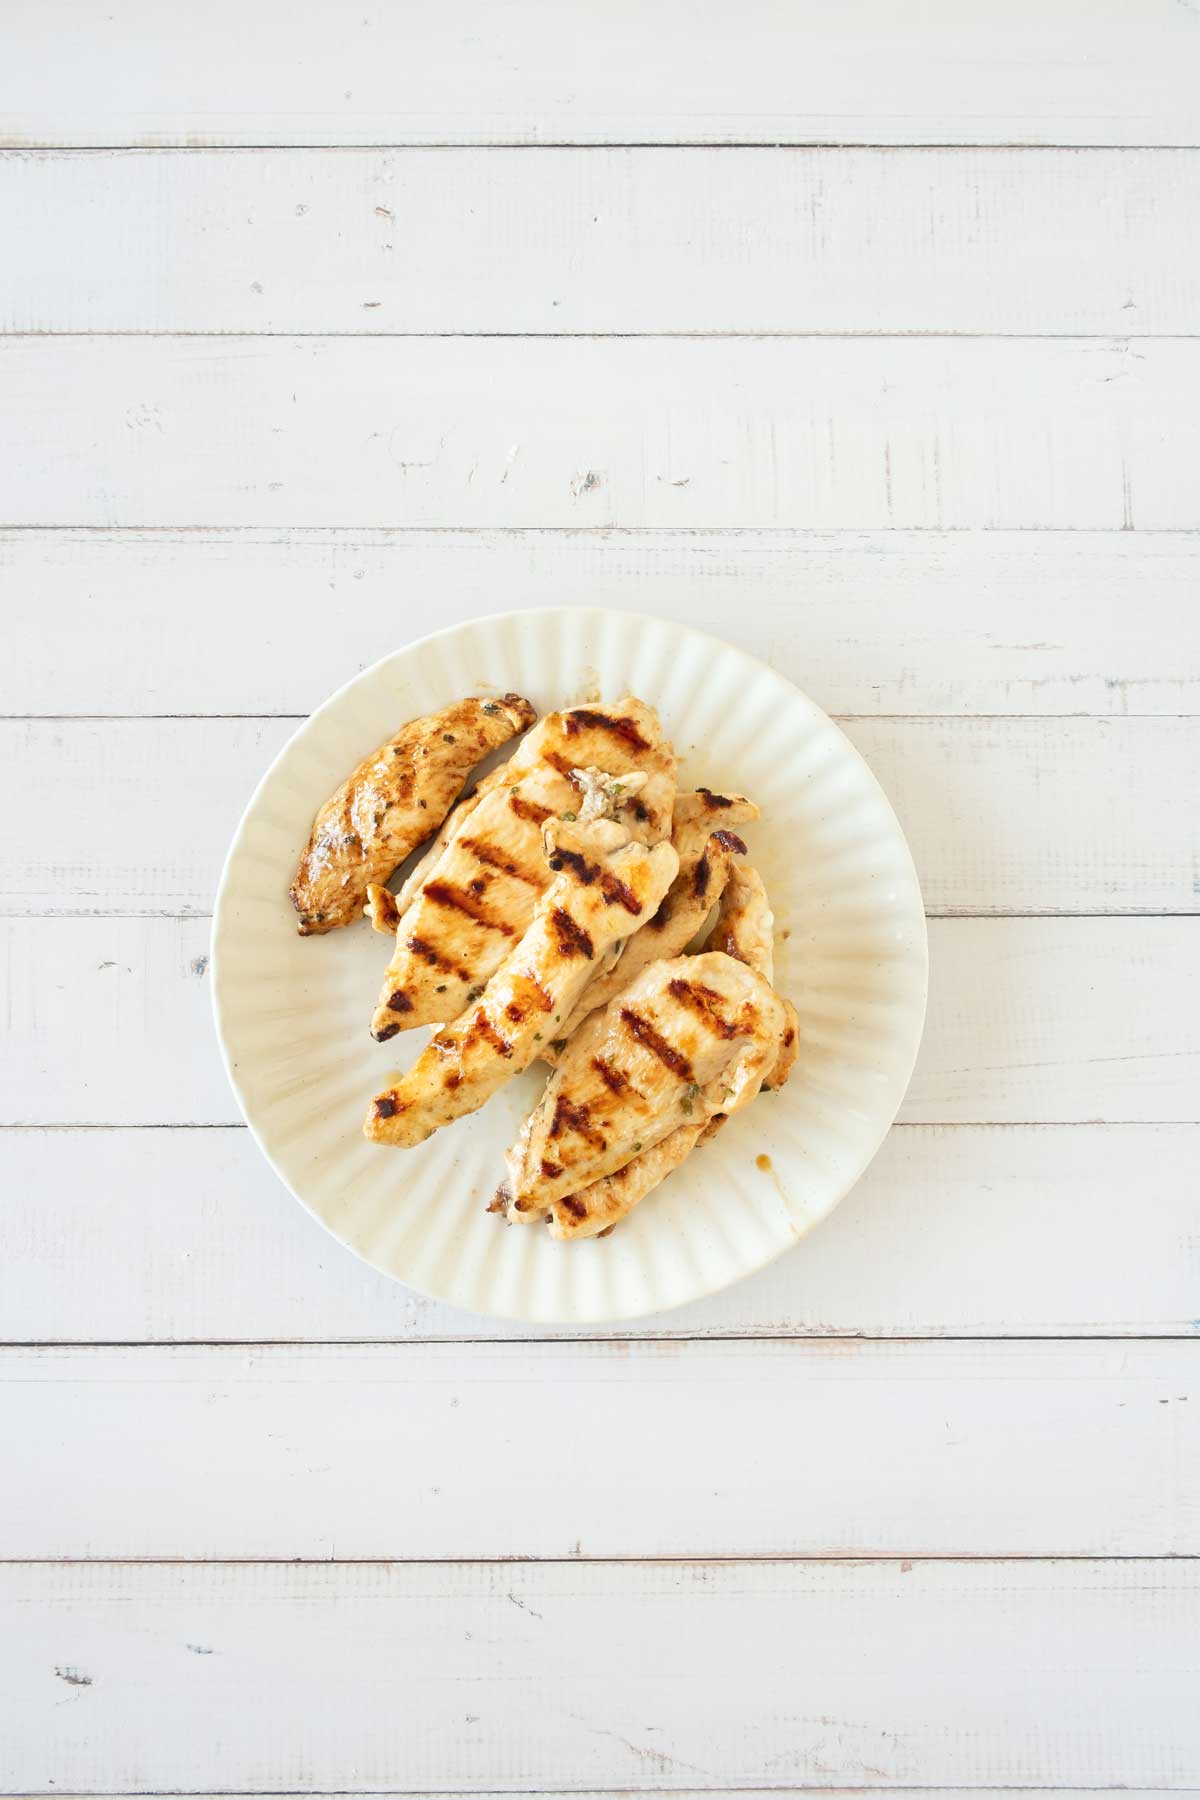 Grilled chicken breasts with grill marks on a white plate, placed on a white wooden surface.